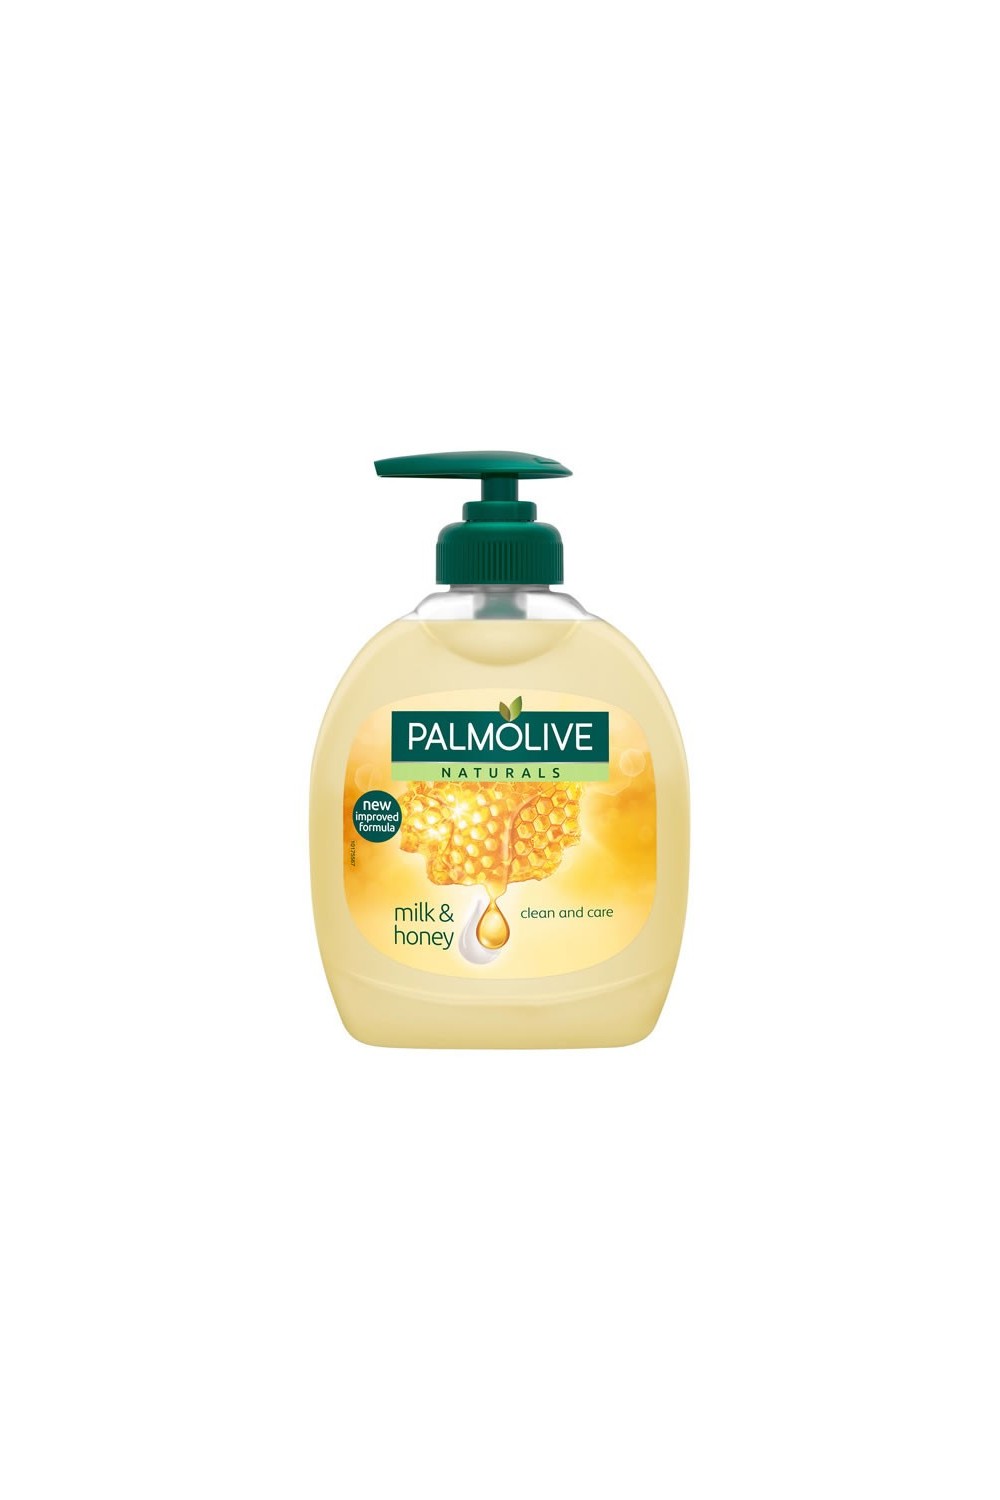 Palmolive Naturals Hand Soap Dry Skin 300ml